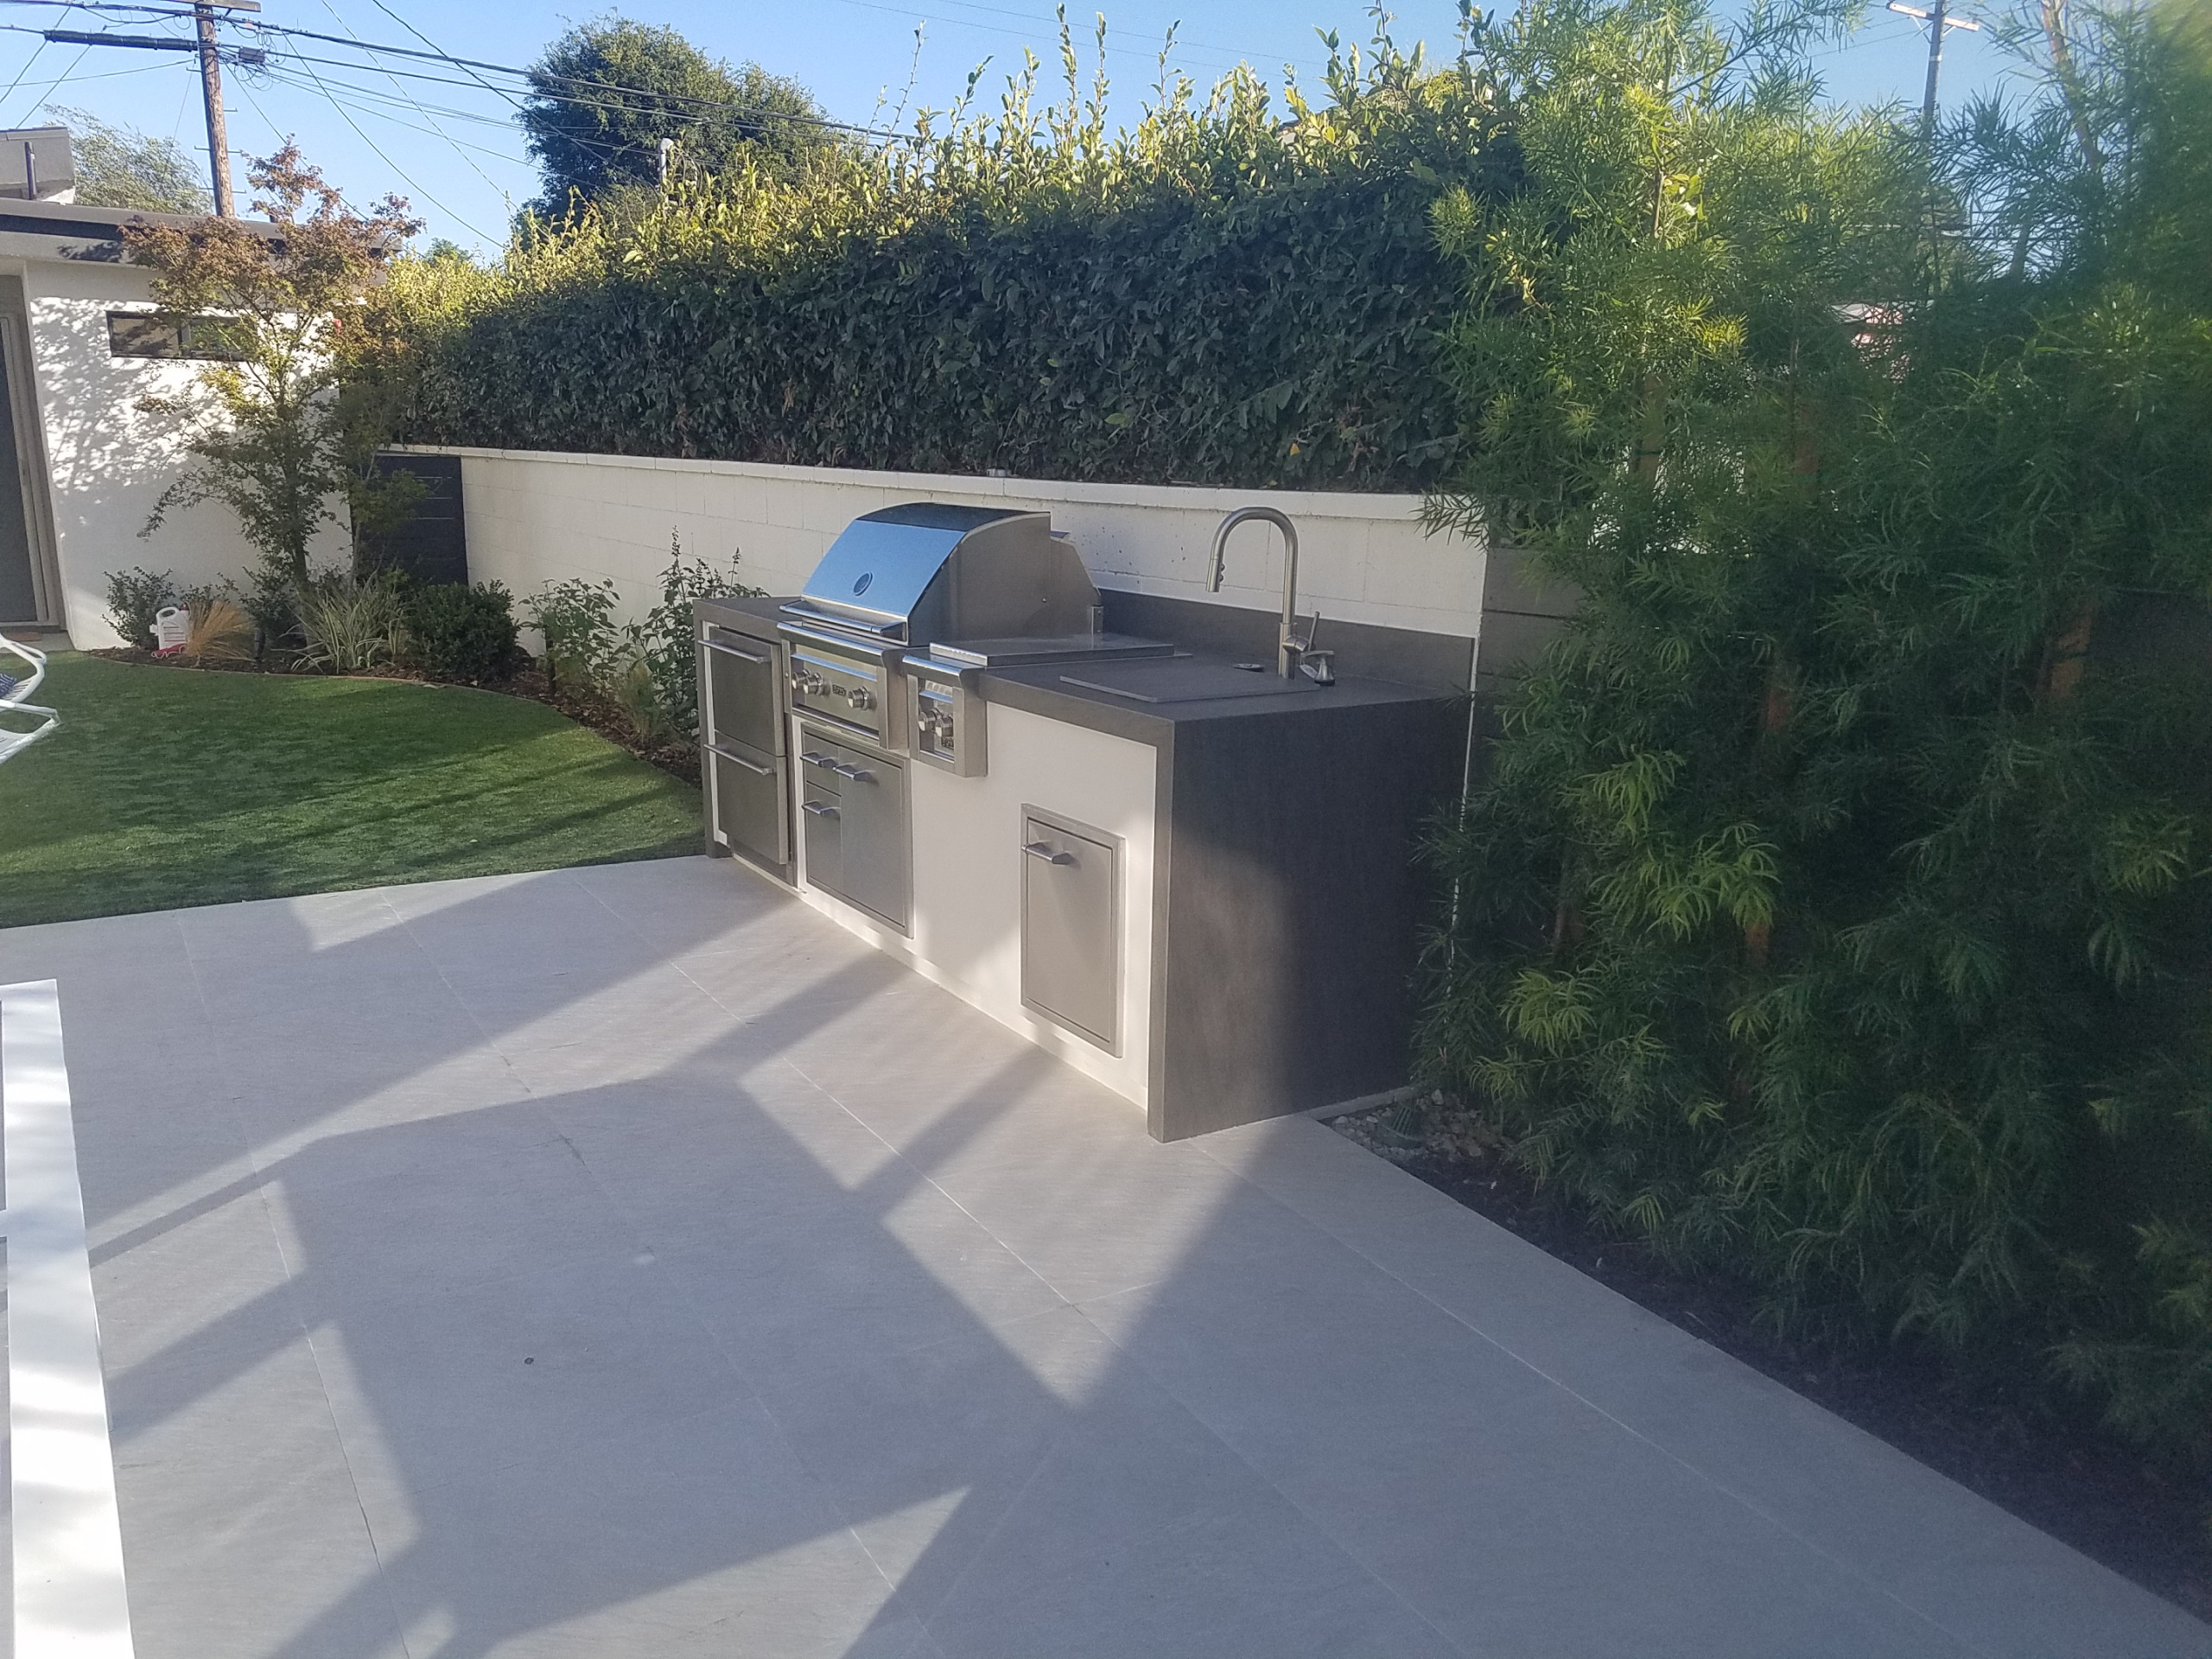 Modern outdoor kitchen with sink and custom cover
Minimalist backyard patio kitchen photo in Los Angeles